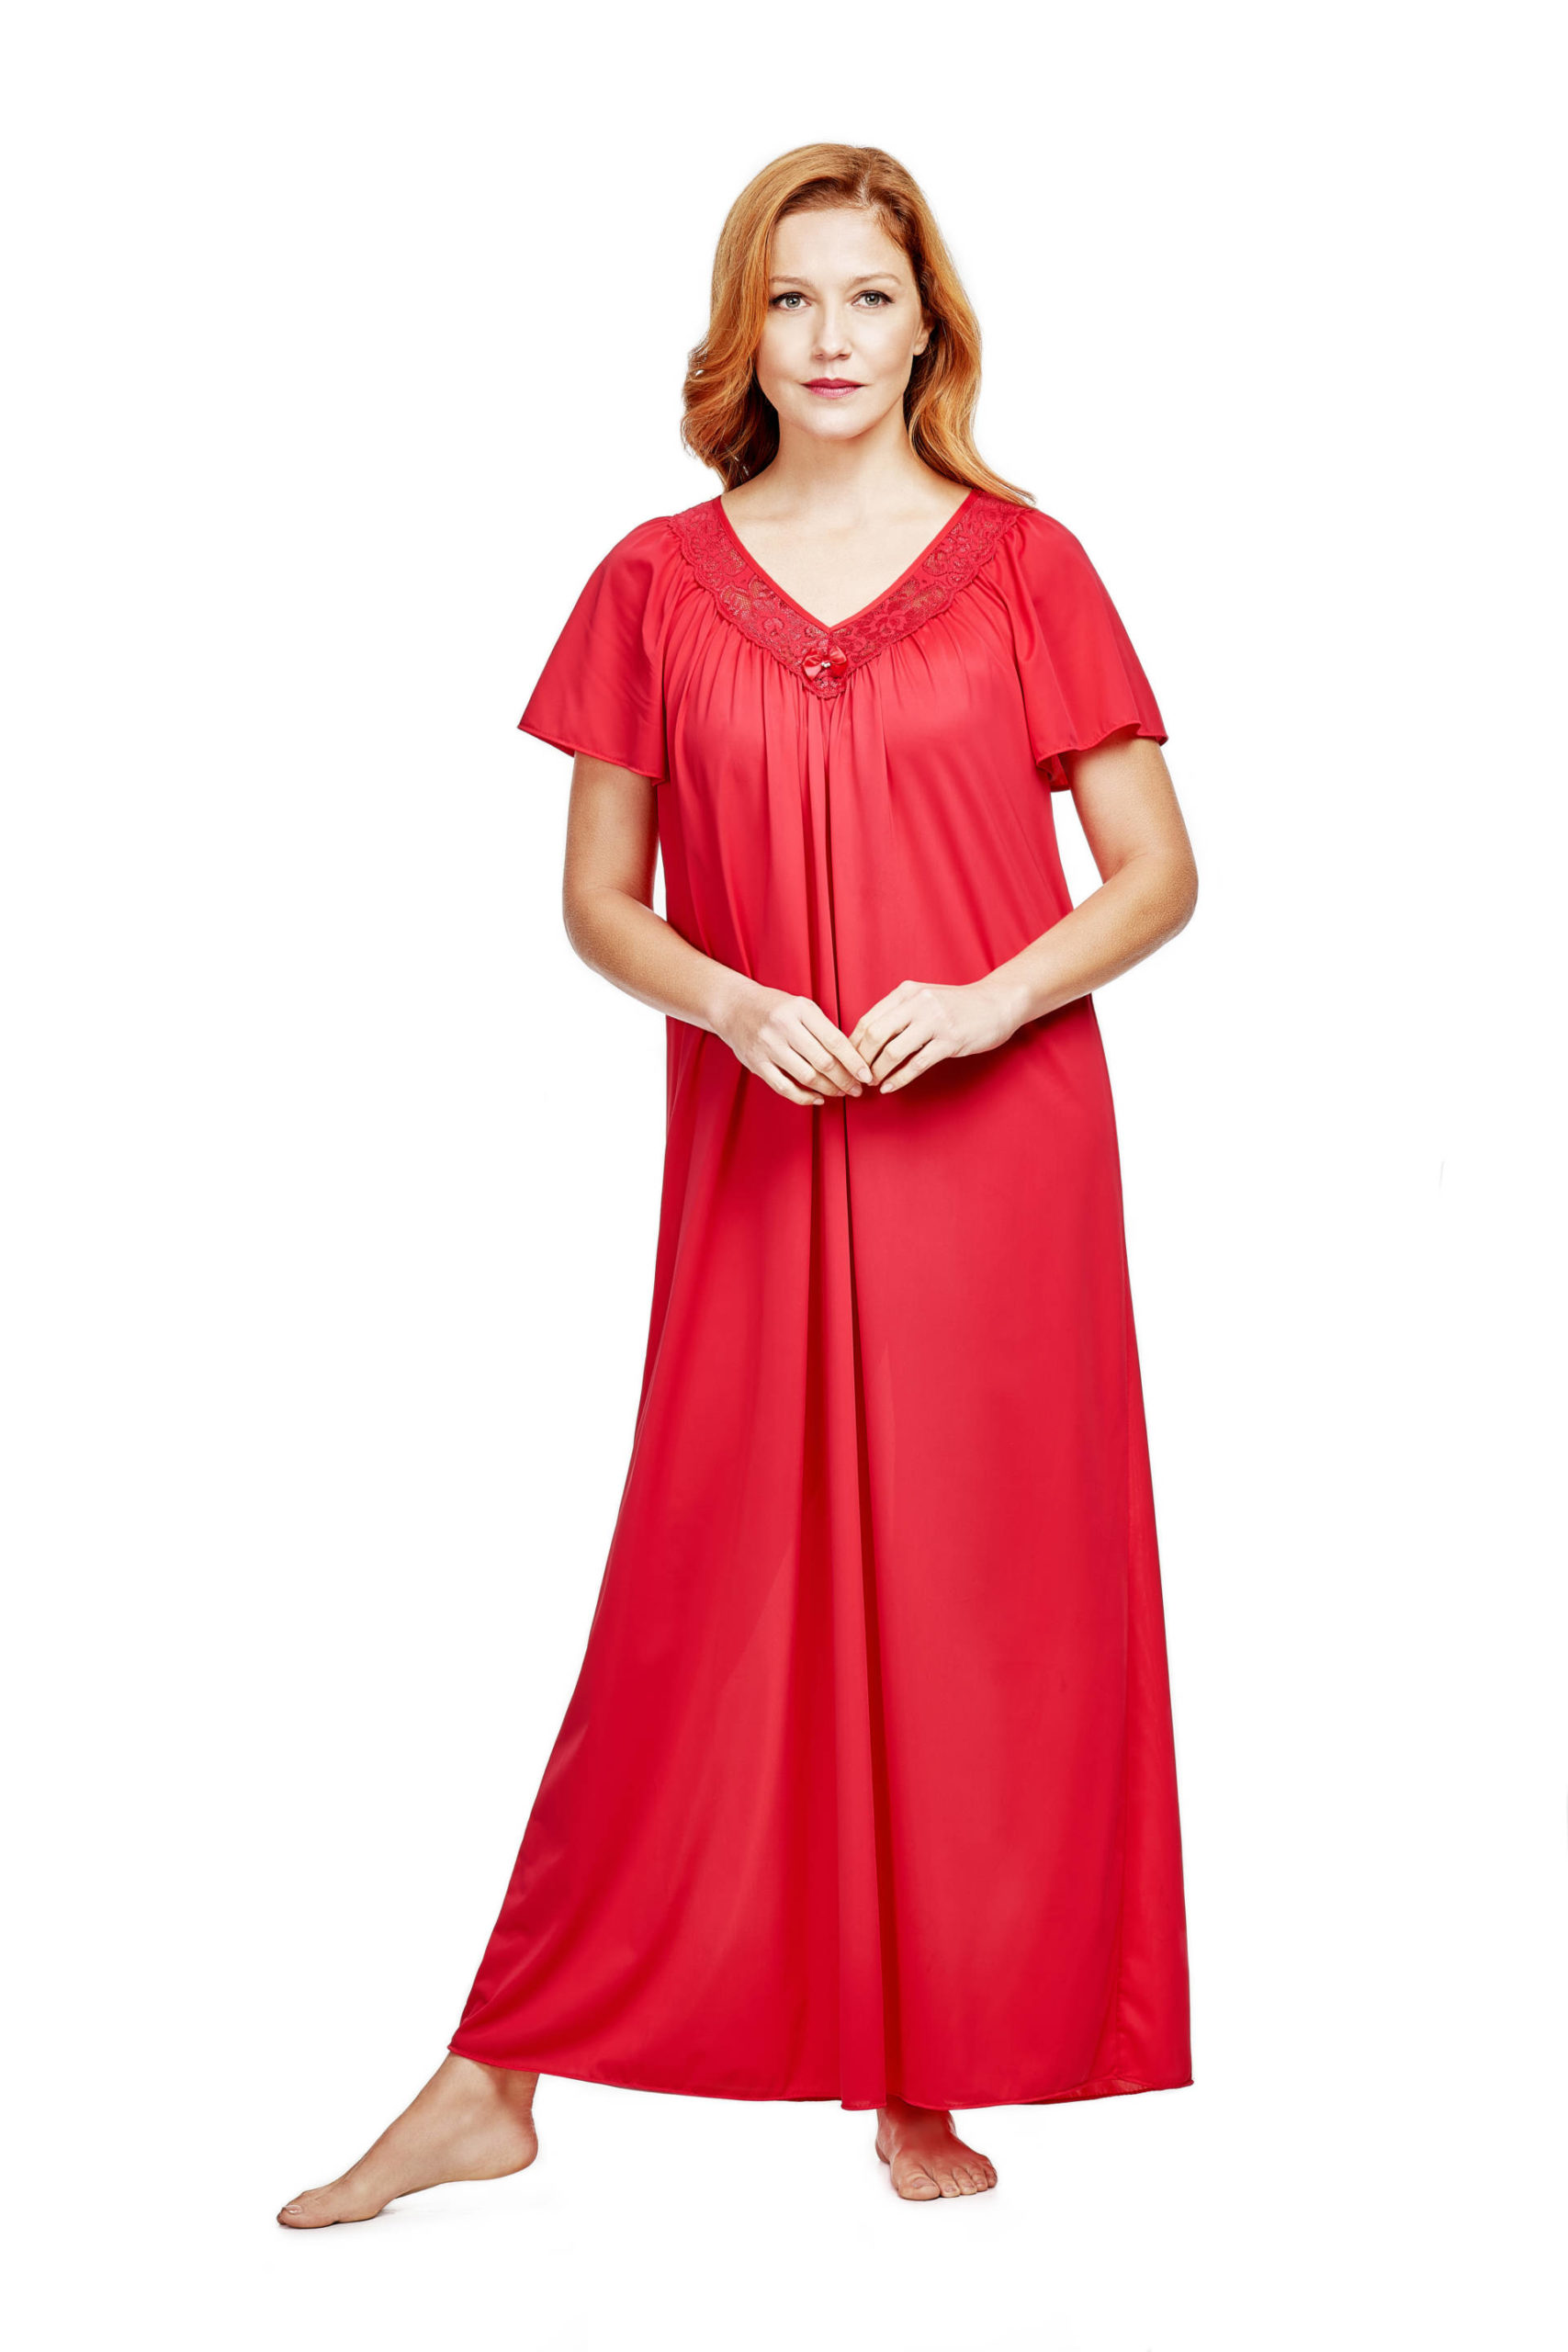 Women's Long Lace V-Neck Nightgown